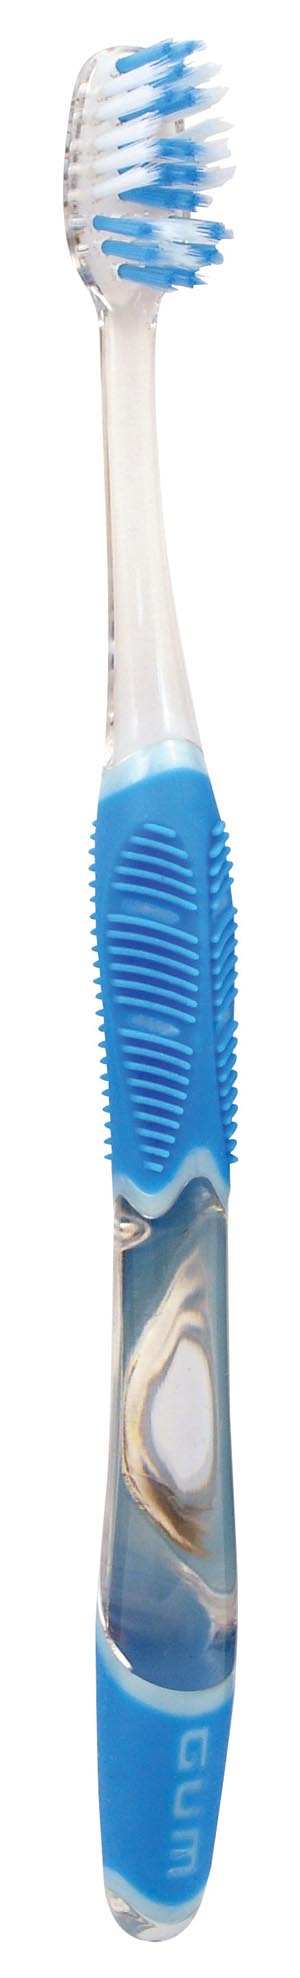 Sunstar Gum® Adult Toothbrush. Technique® Toothbrush, Deep Clean, Soft Bristles, Full Head, 1 Dz/Bx (Us Only) (Products Cannot Be Sold On Amazon.Com O